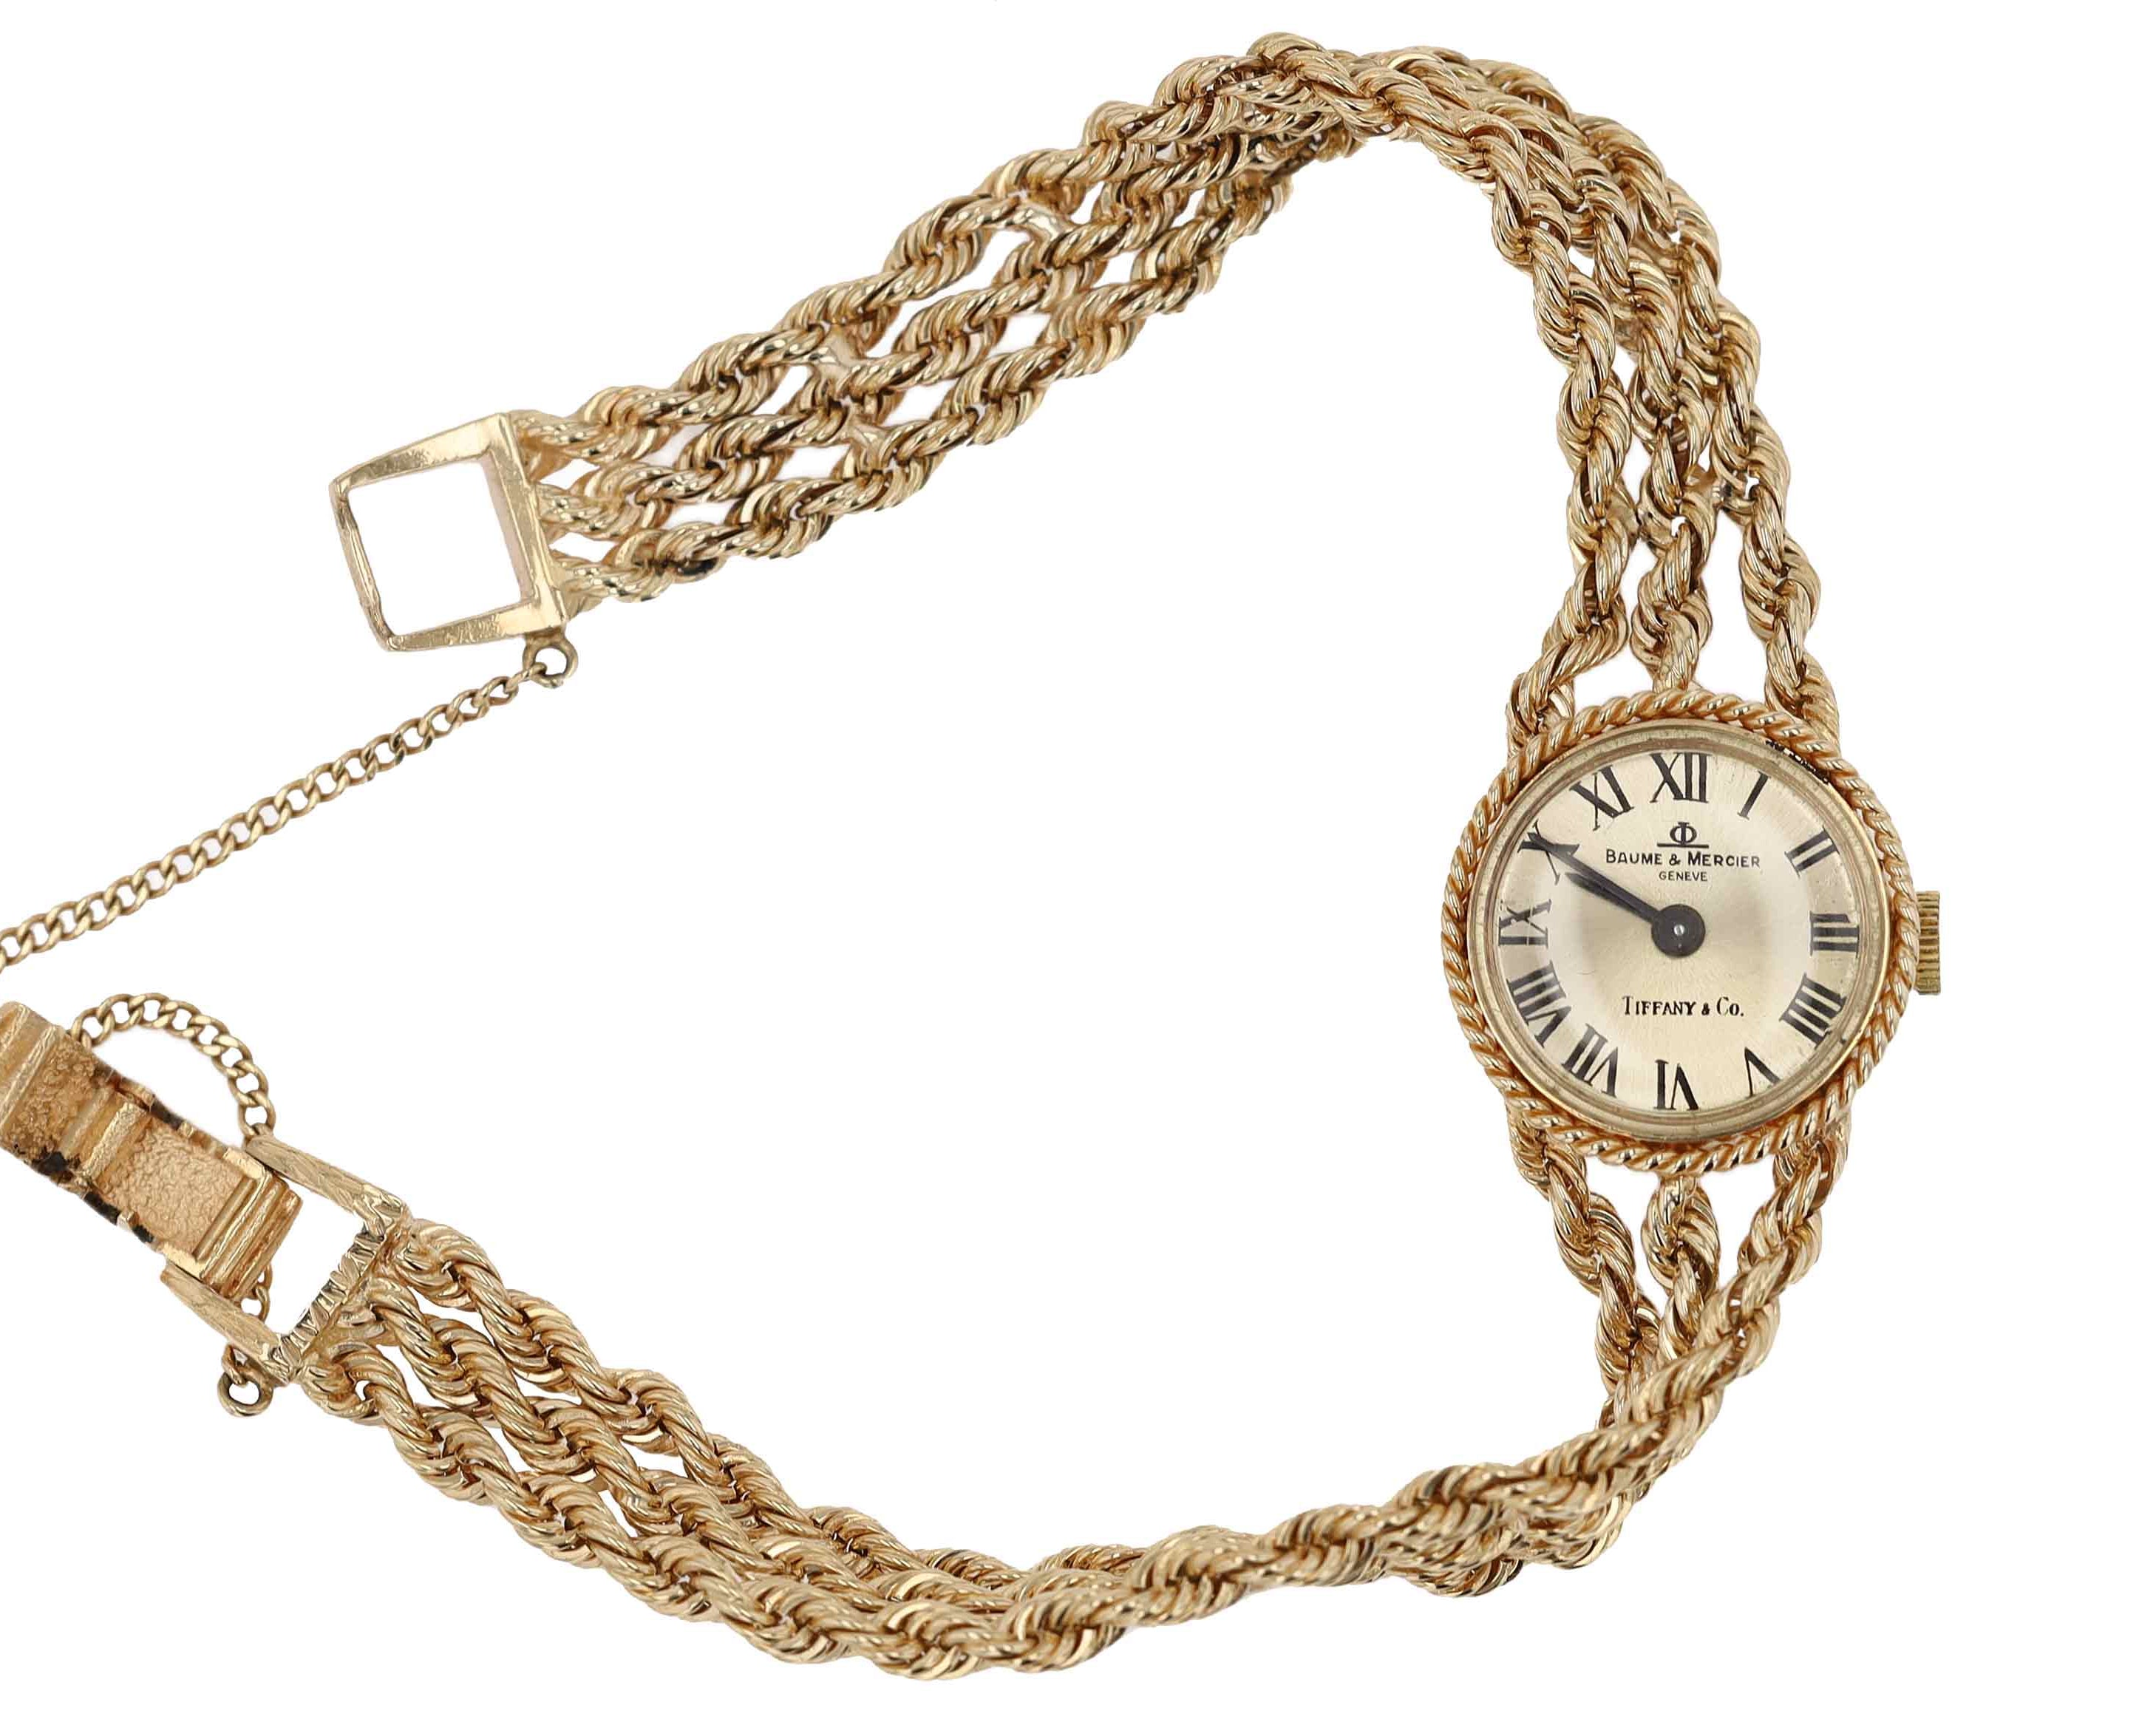 Vintage Tiffany & Co. 3 Strand Rope Cocktail Watch